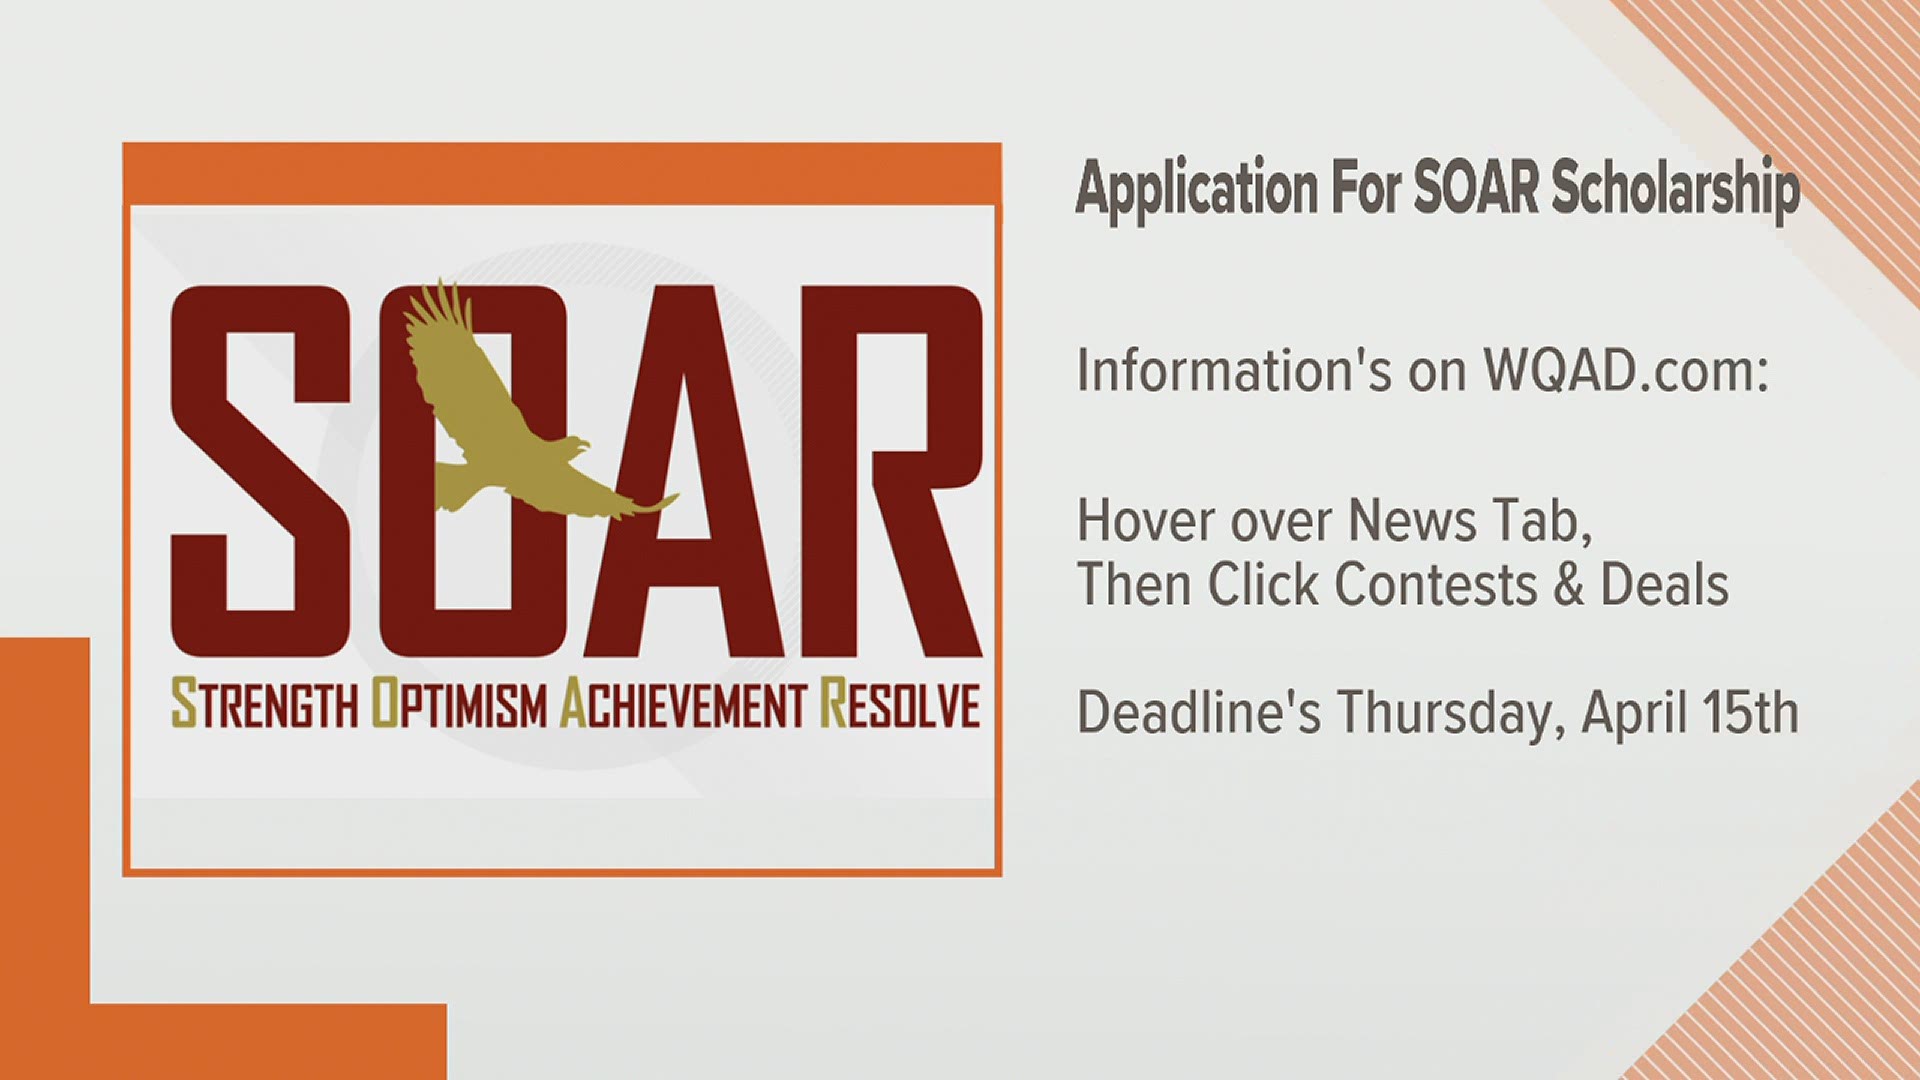 Sedona Group invites high school seniors to apply for this year's SOAR Scholarship Contest.